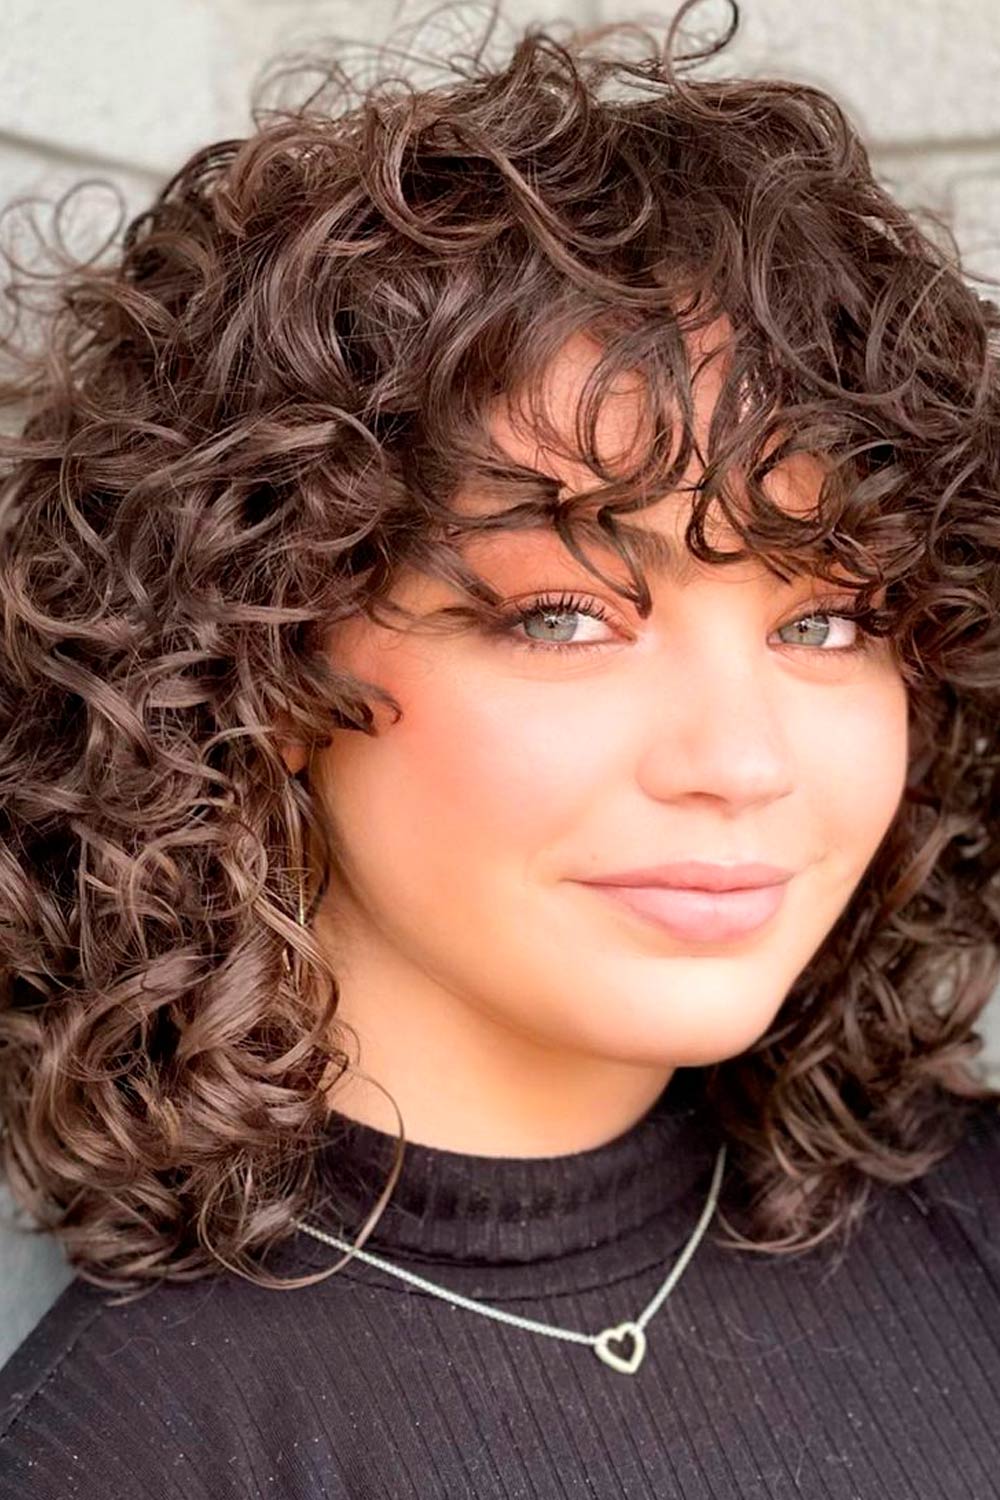 37 Amazing Short Curly Hairstyles for Women